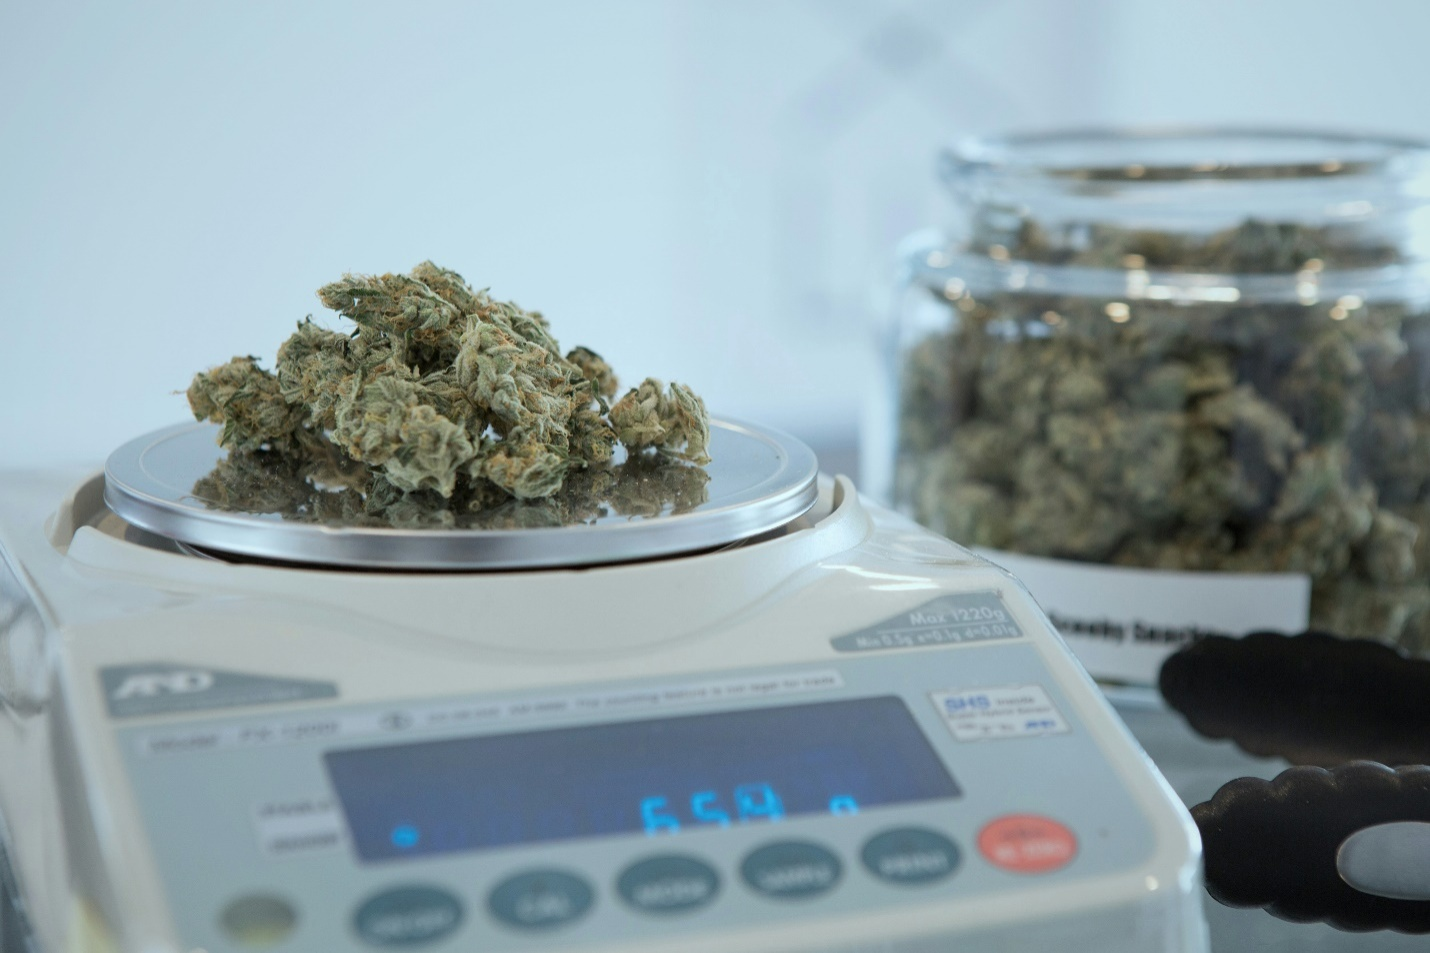 Measuring weed on a kitchen scale.